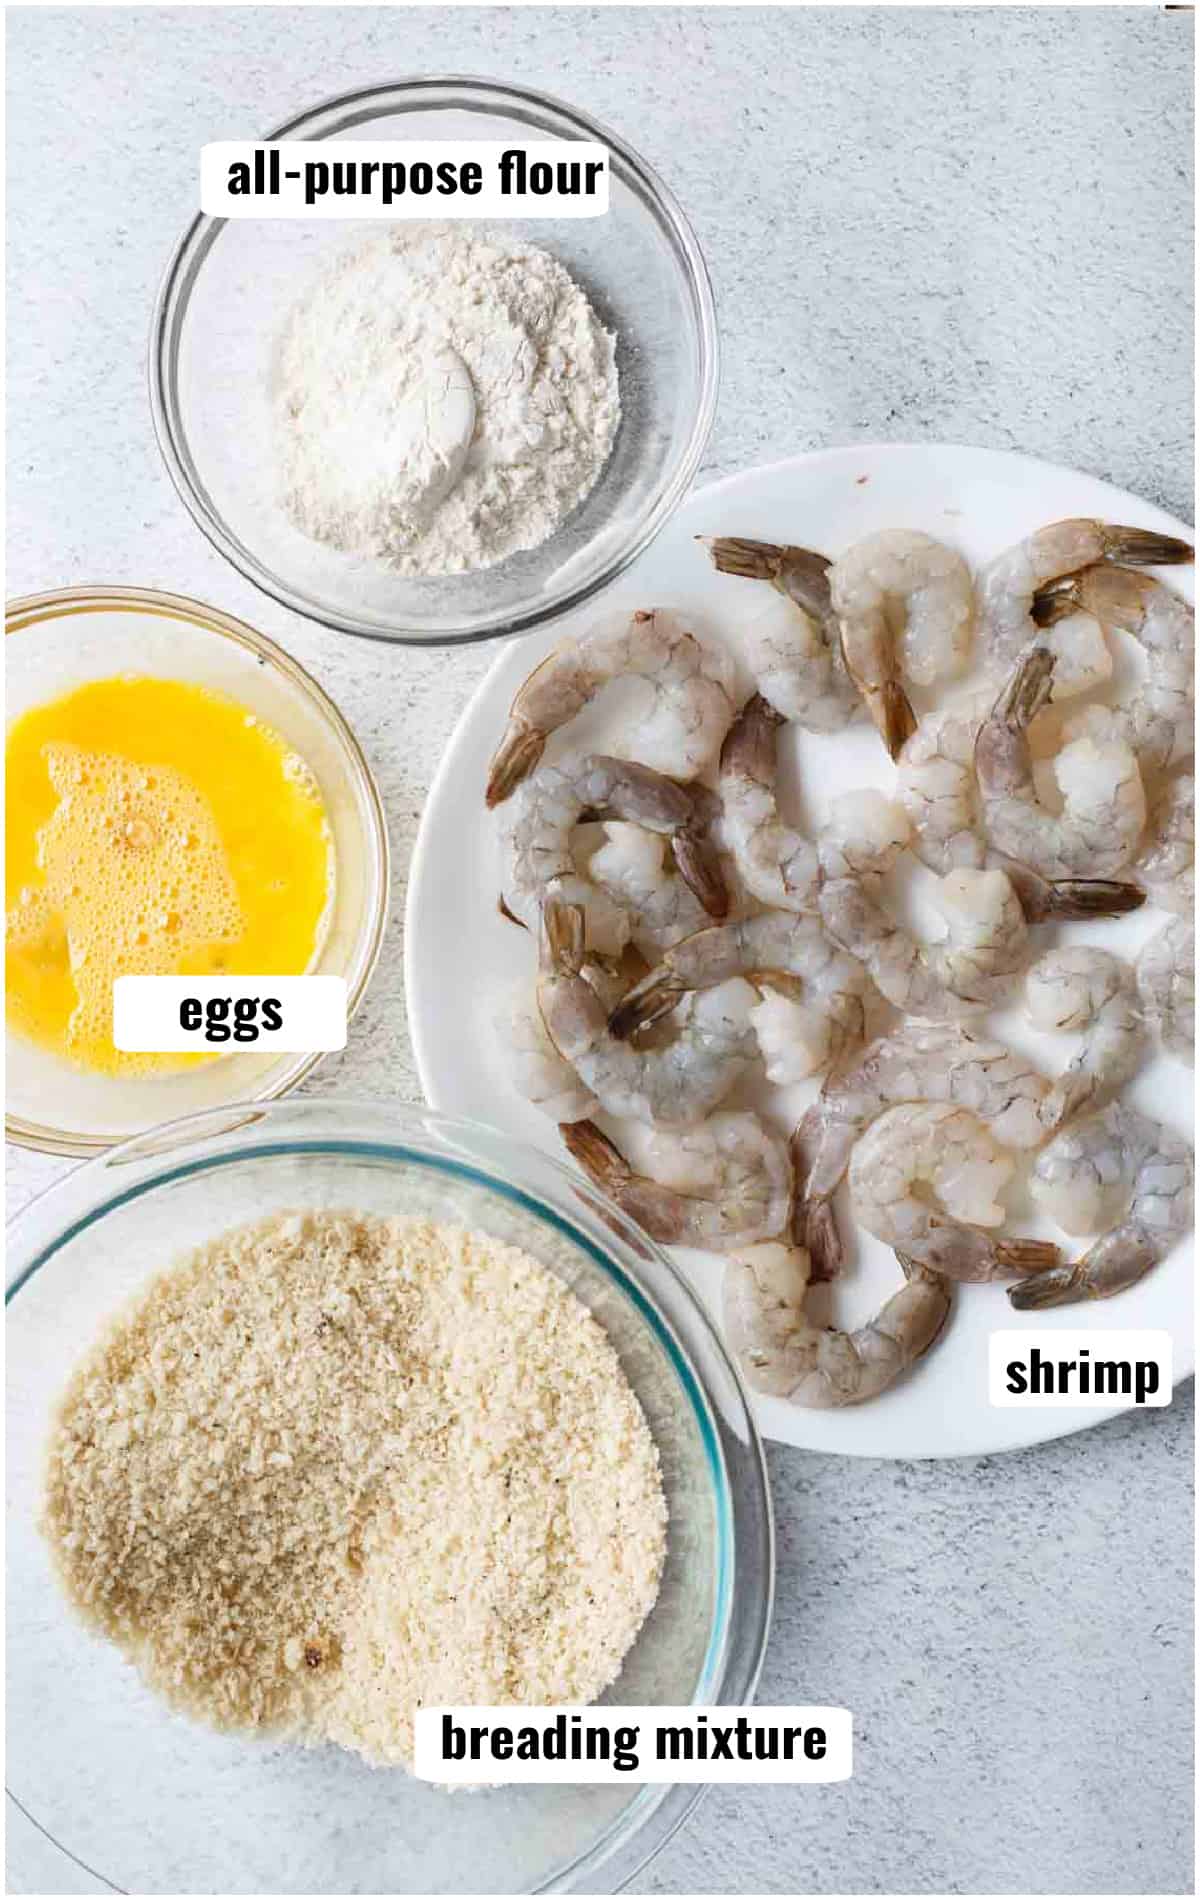  All the ingredients to make this fried shrimp recipe.